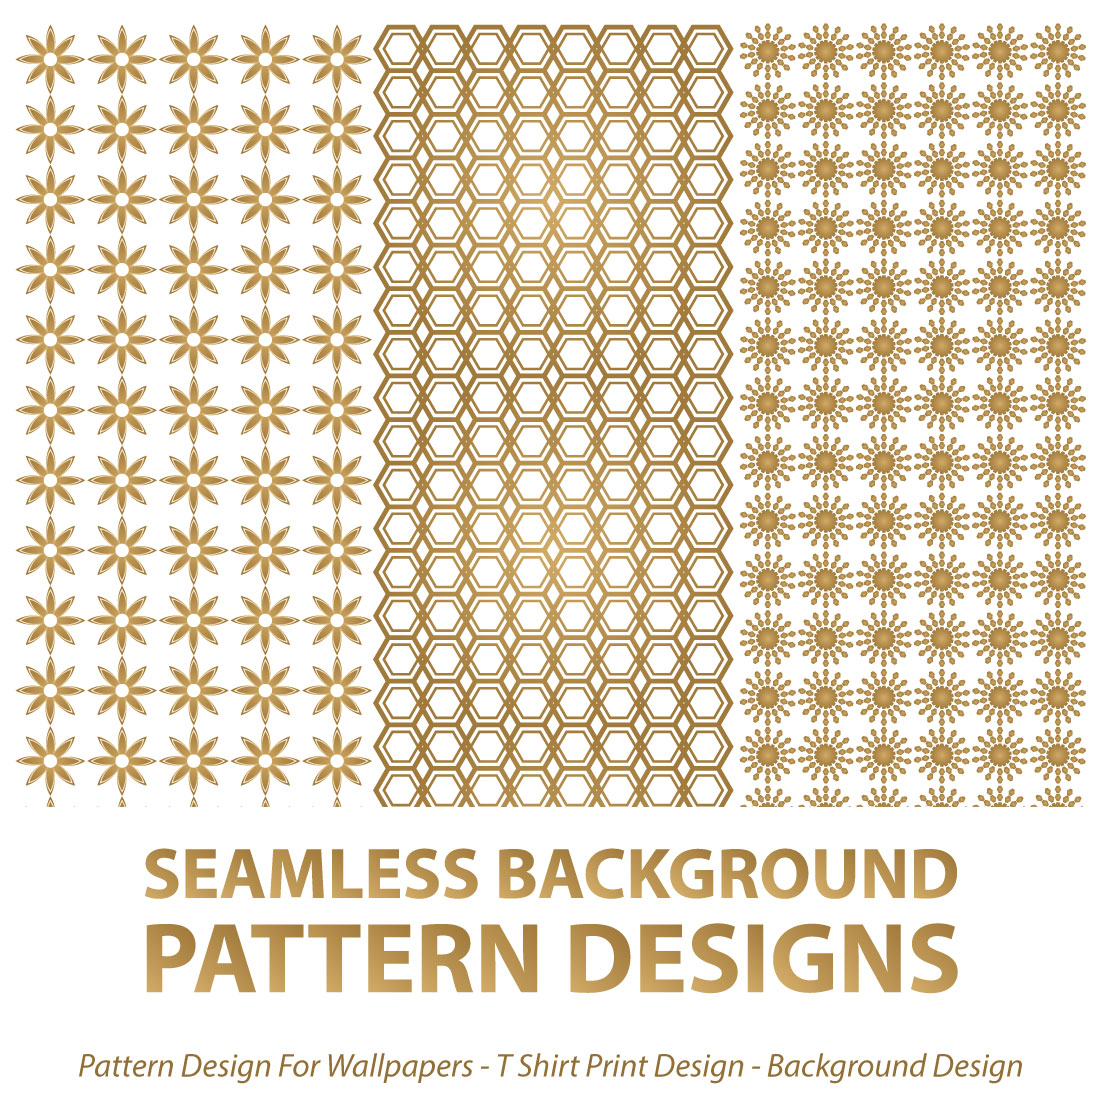 SEAMLESS BACKGROUND PATTERNS DESIGNS (PATTERN DESIGN FOR WALLPAPERS - T SHIRT PRINT DESIGN - BACKGROUND DESIGN) cover image.